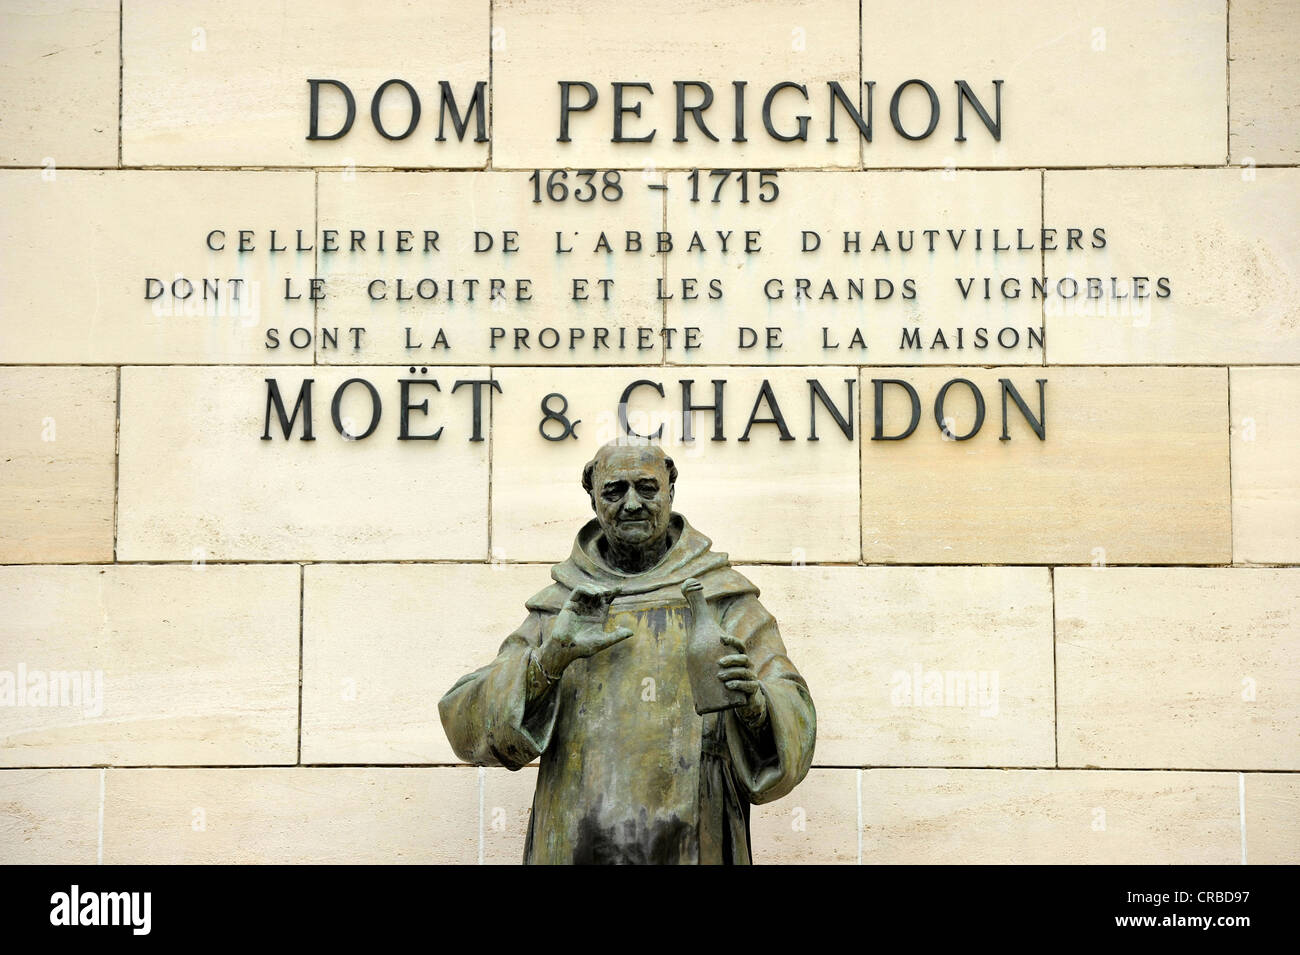 Statue of DomPerignon, Moët & Chandon winery, headquarters, luxury goods group LVMH, Louis Vuitton Moët Hennessy, Épernay Stock Photo